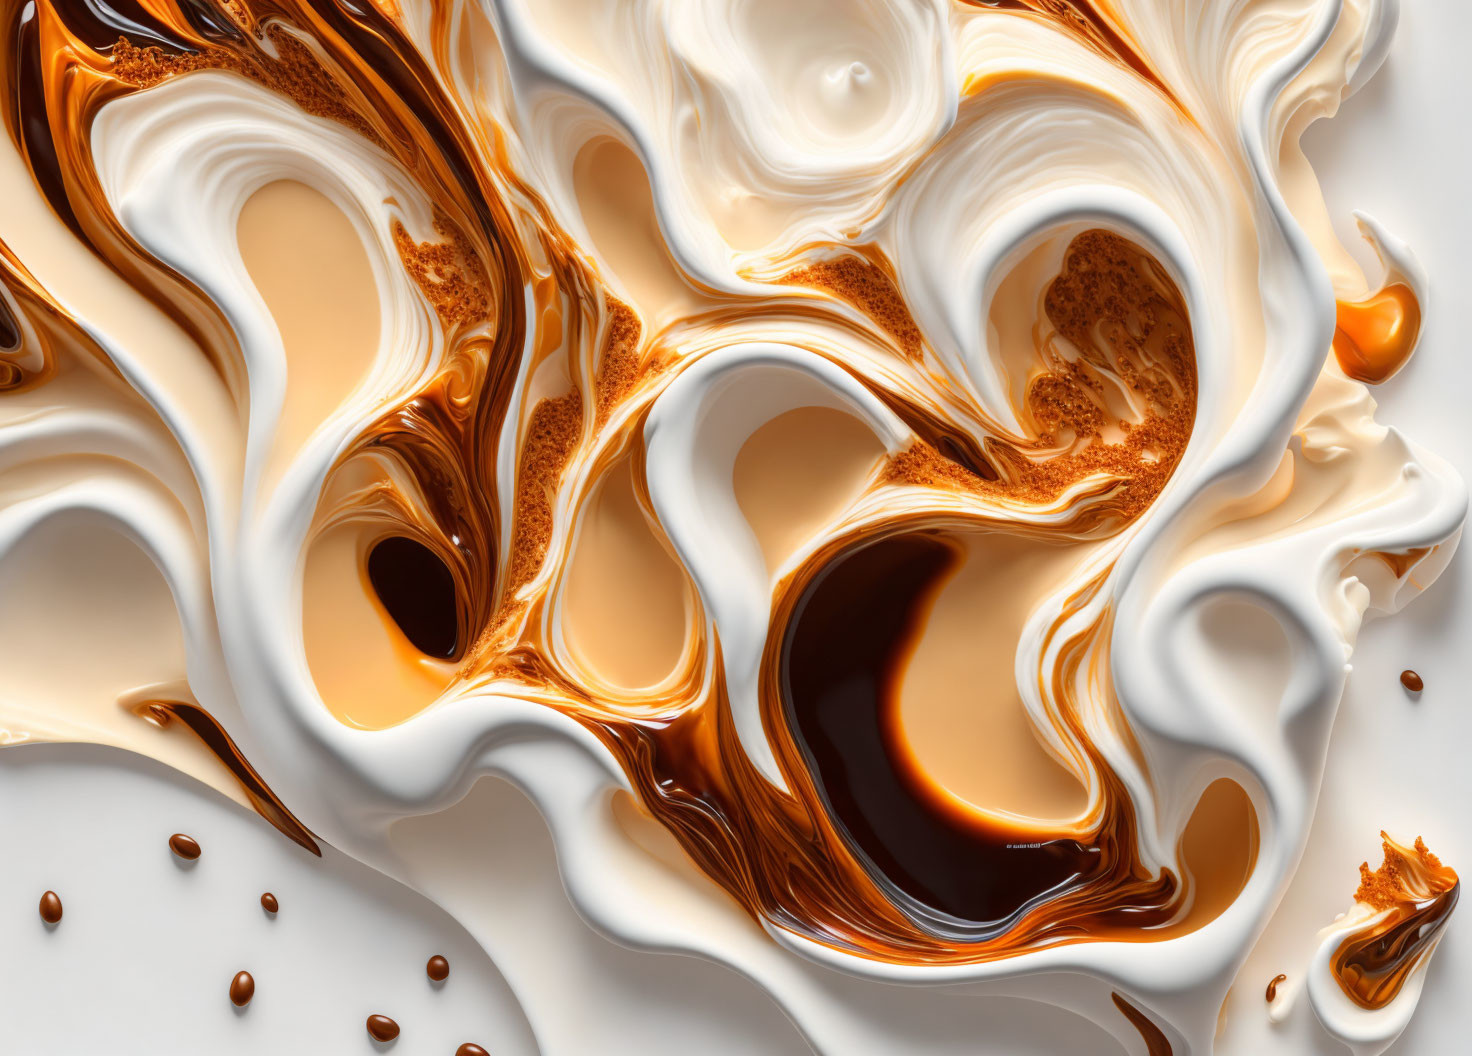 Abstract Swirl of Coffee and Milk with Scattered Coffee Beans